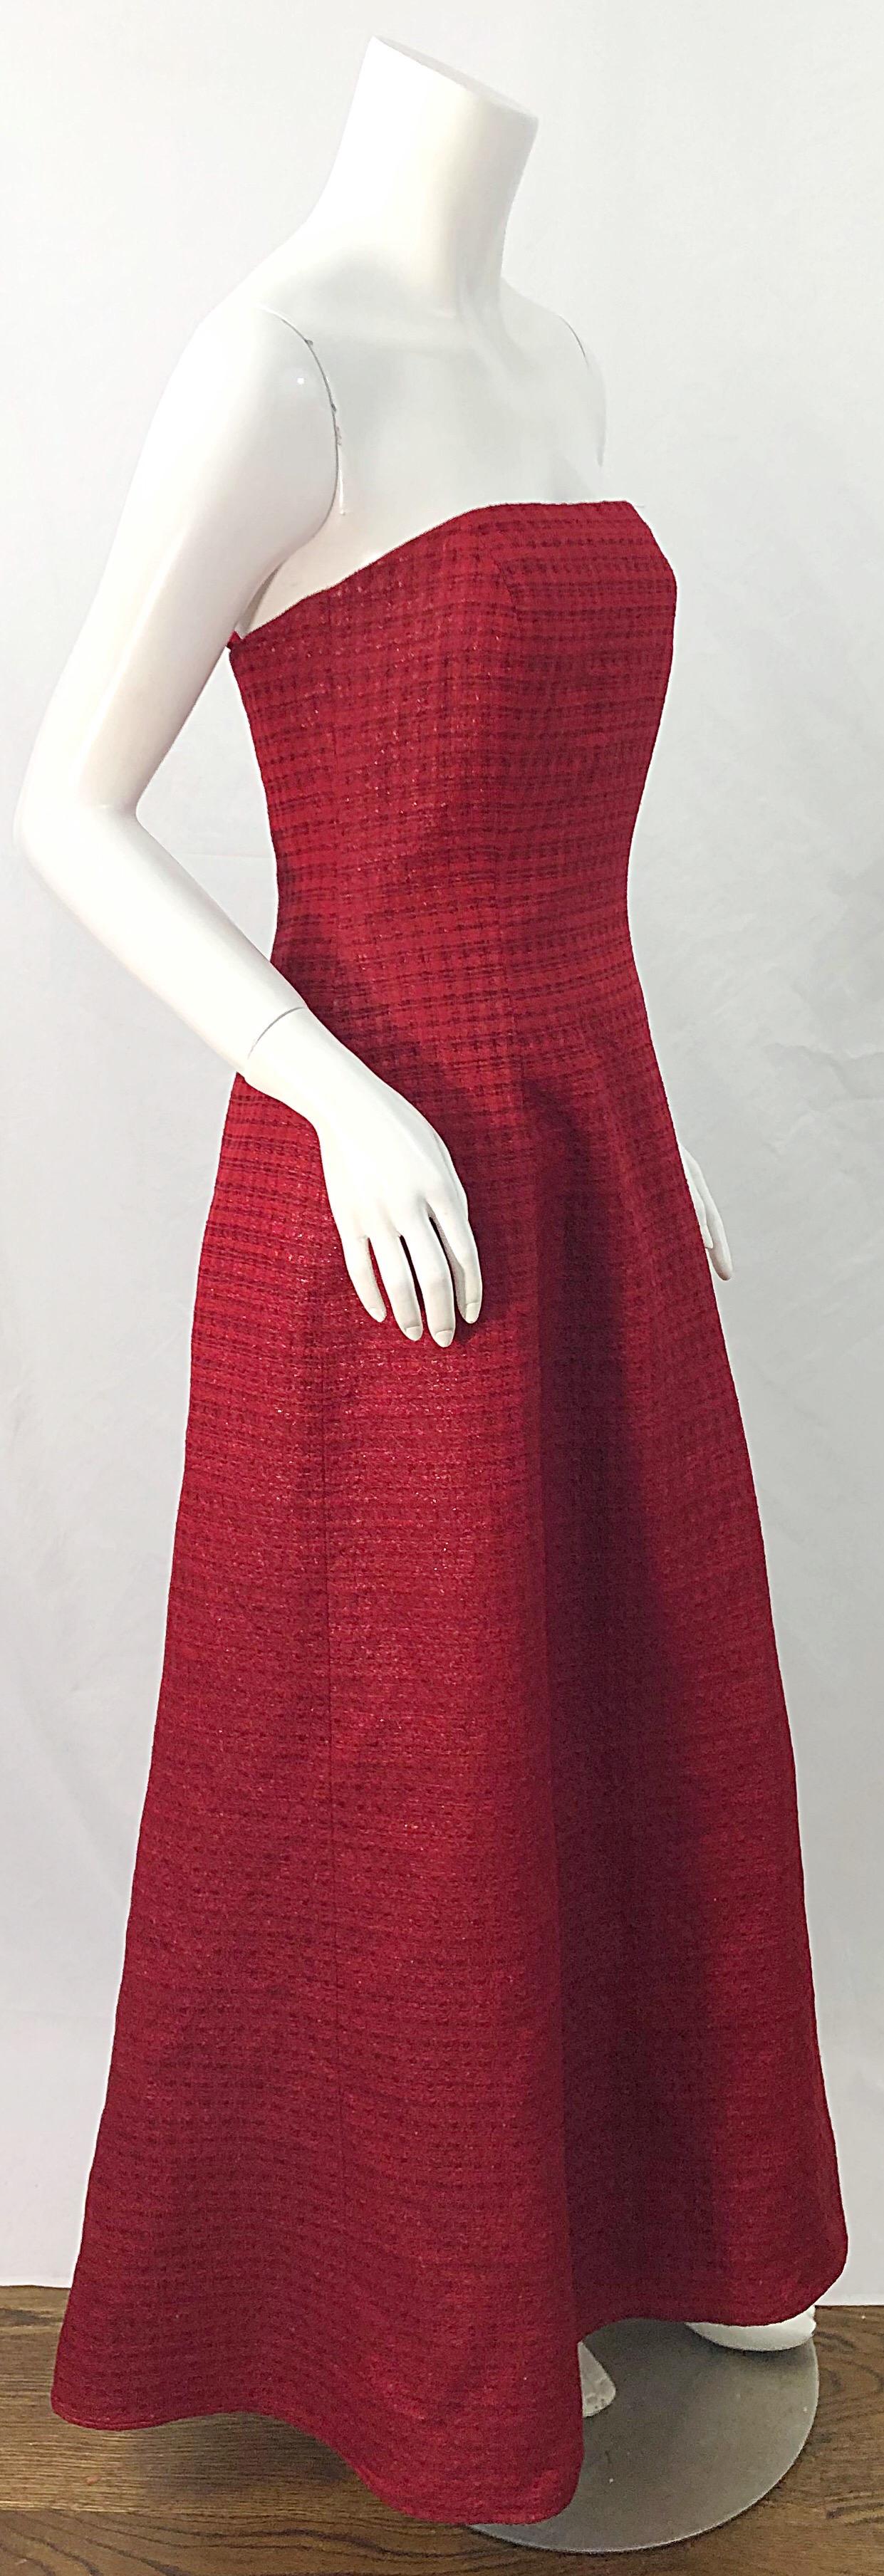 1990s Louis Feraud Cranberry Red Strapless Vintage 90s Silk + Wool Gown Dress For Sale 5